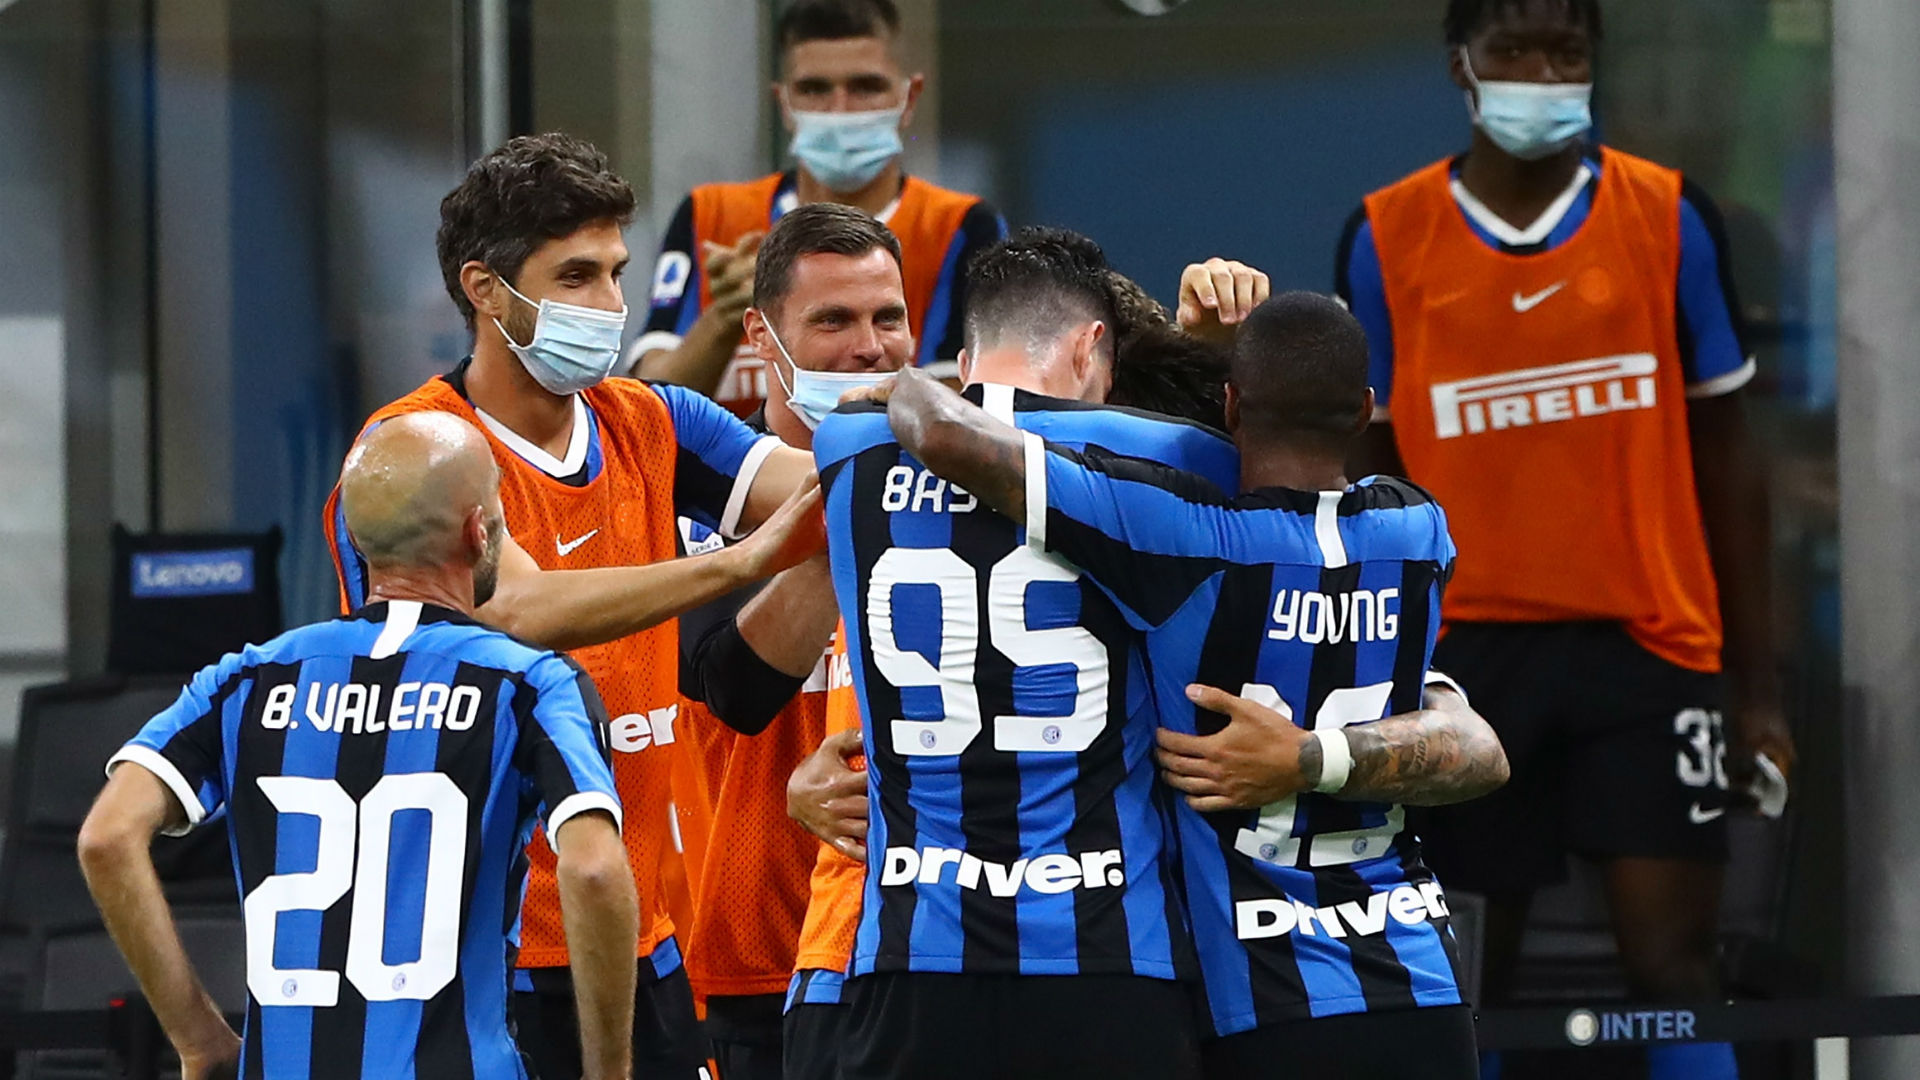 SPAL may look doomed at the foot of Serie A, but Antonio Conte has urged Inter to maintain their high levels on Thursday.